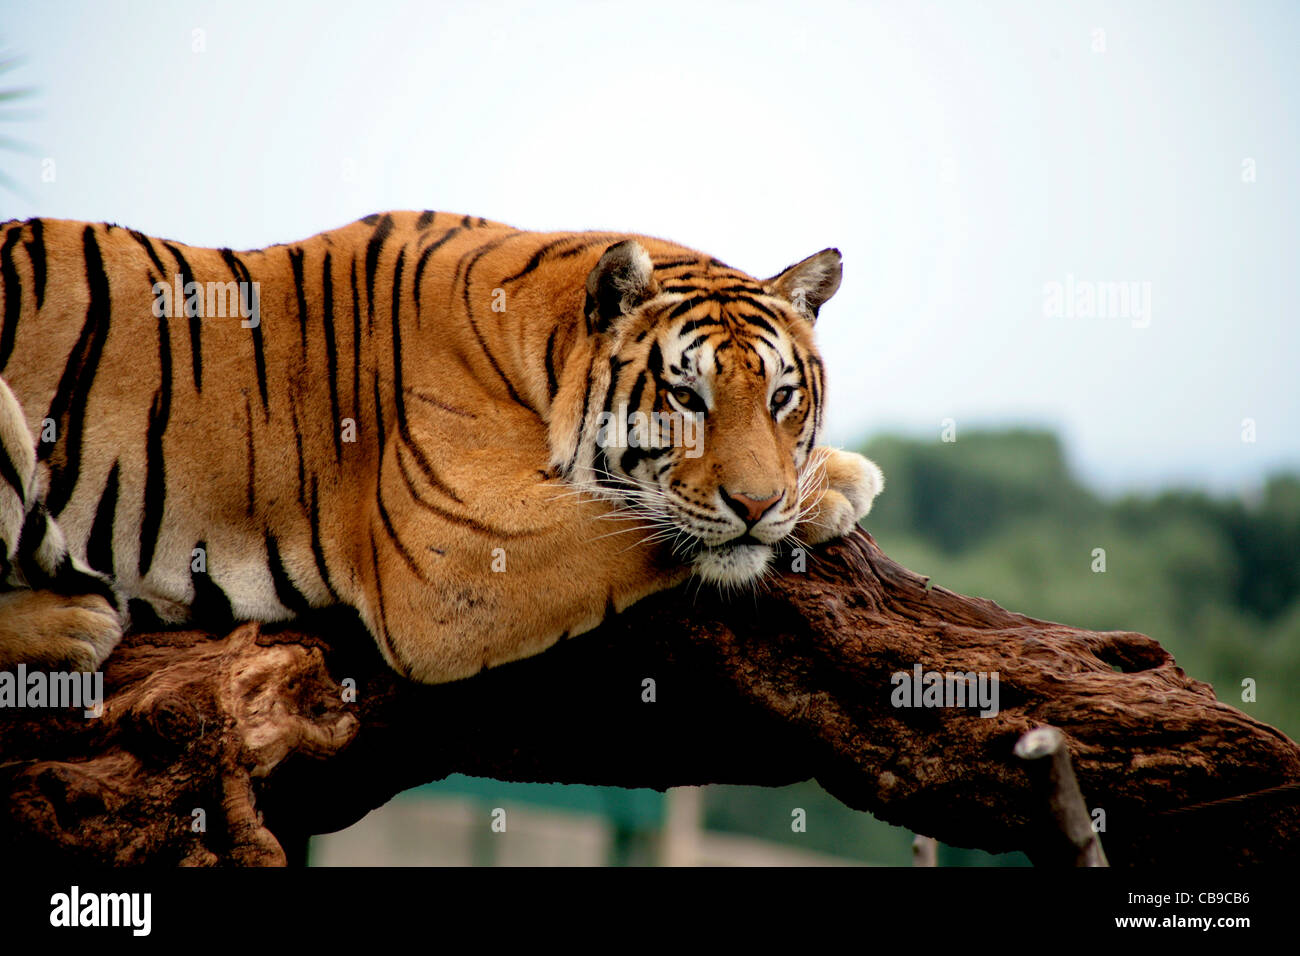 Tiger on a tree resting Stock Photo